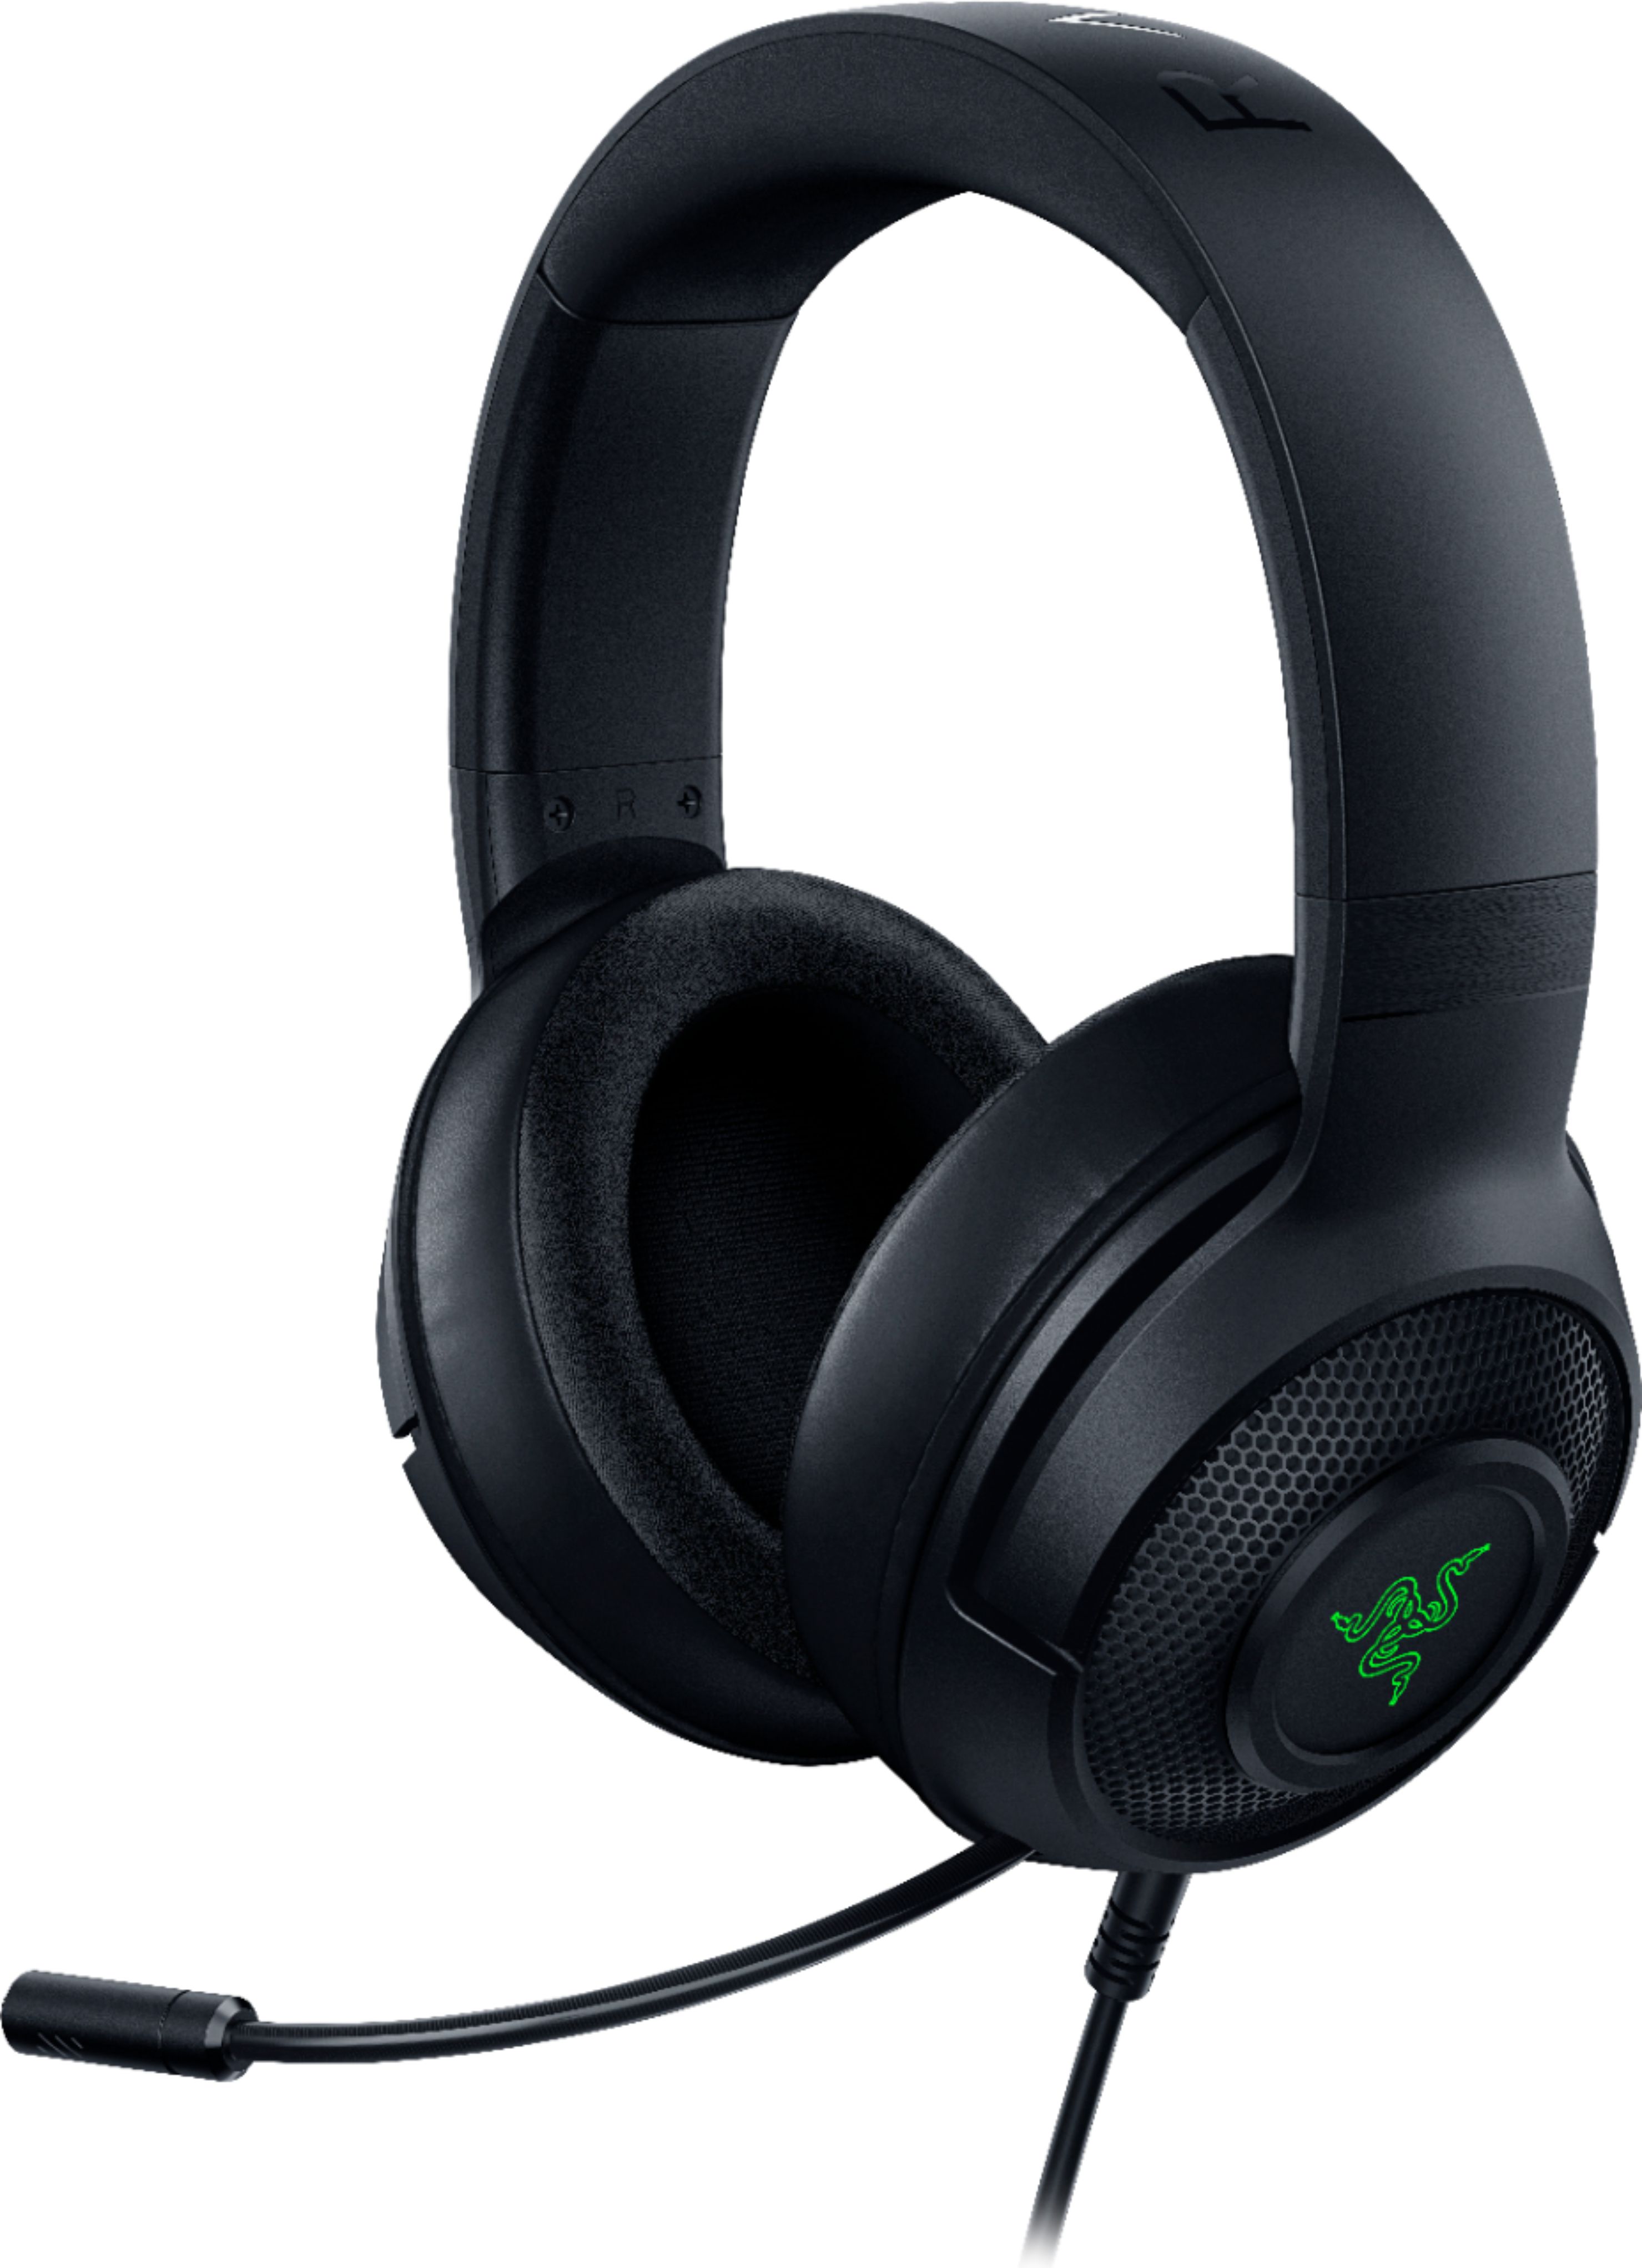 Razer - Kraken V3 X Wired 7.1 Surround Sound Gaming Headset for PC and Mac with RGB Lighting - Black